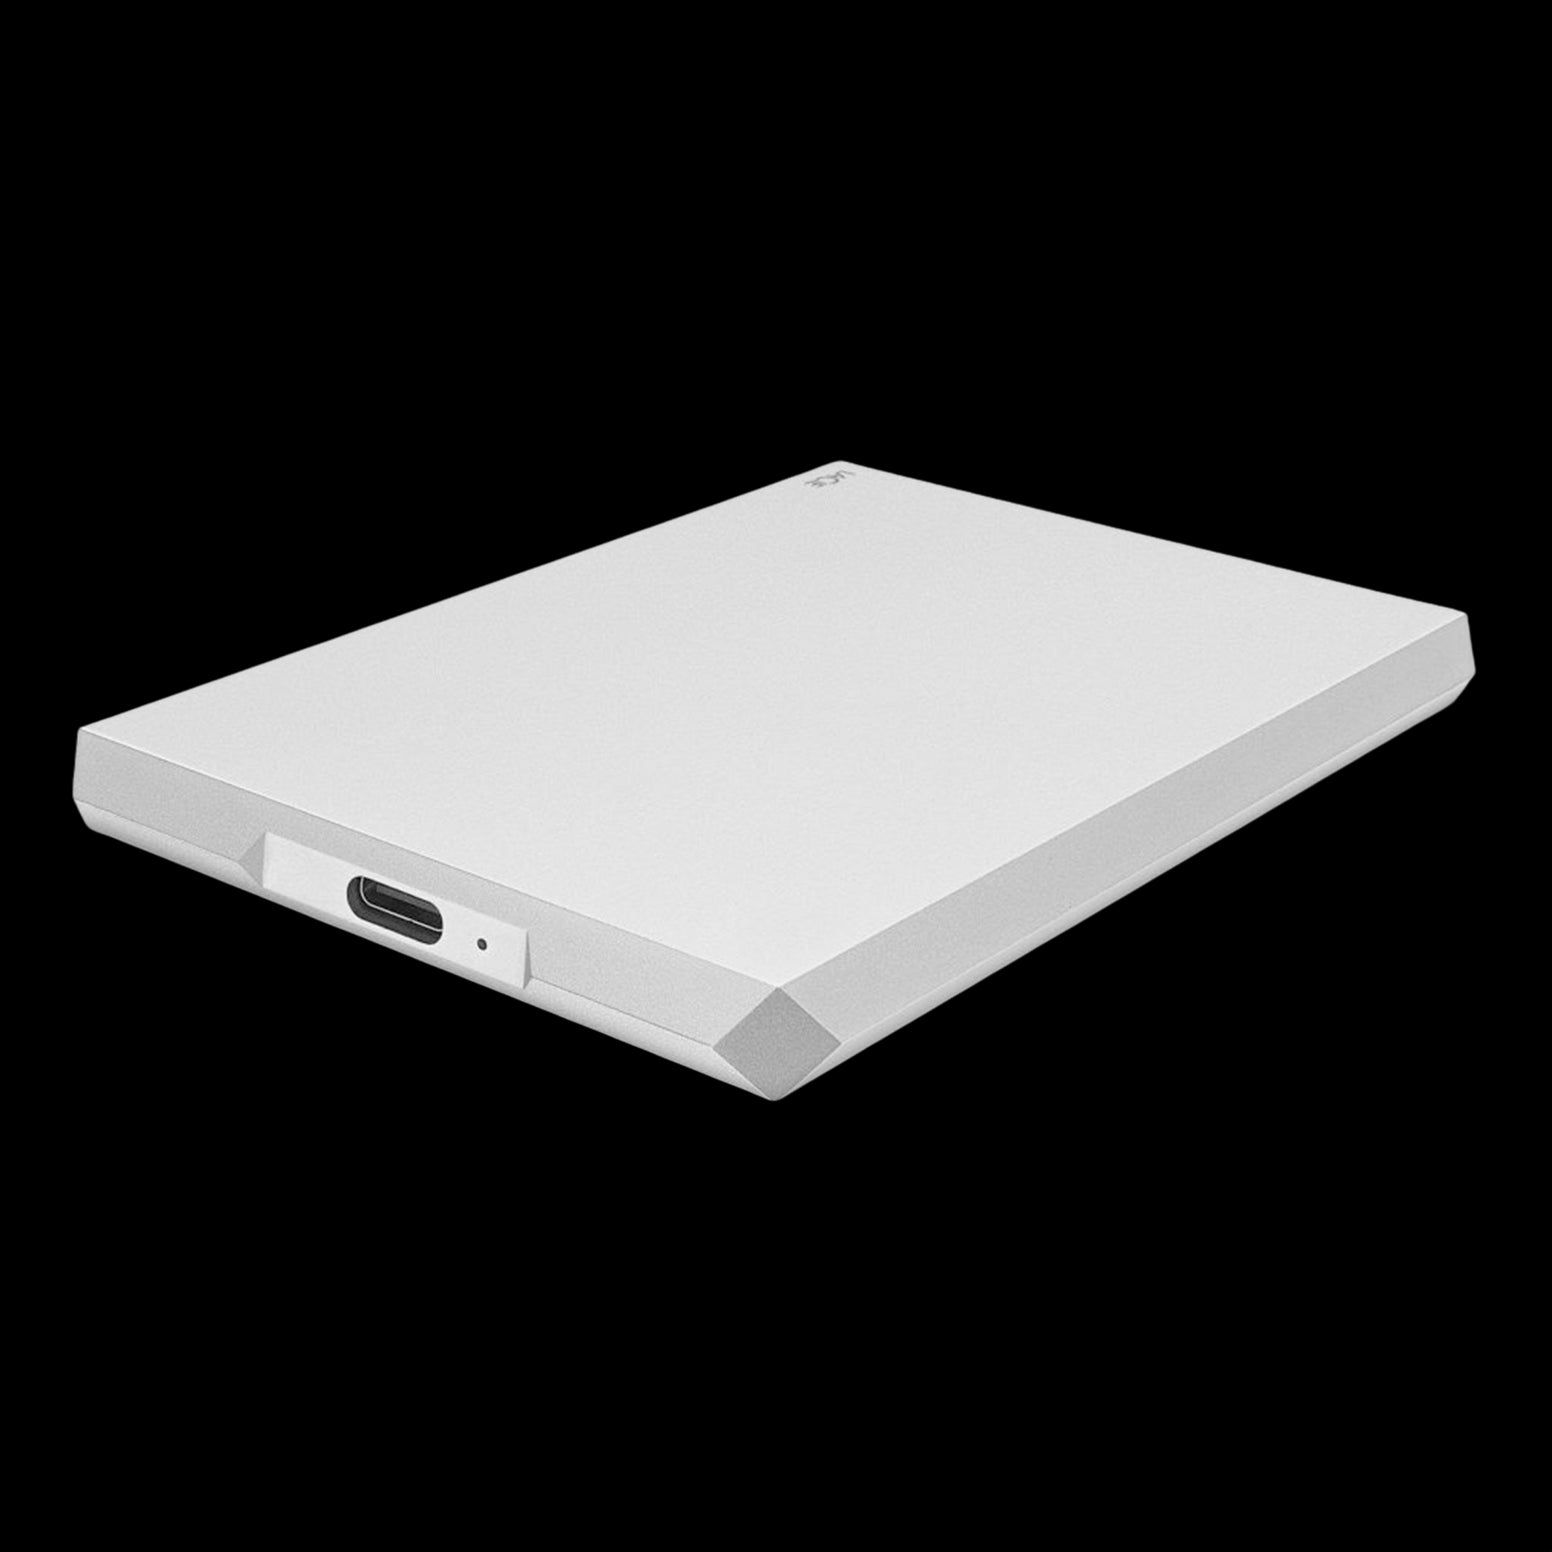 LaCie 2TB HDD External Mobile Drive - Moon Silver - Discontinued